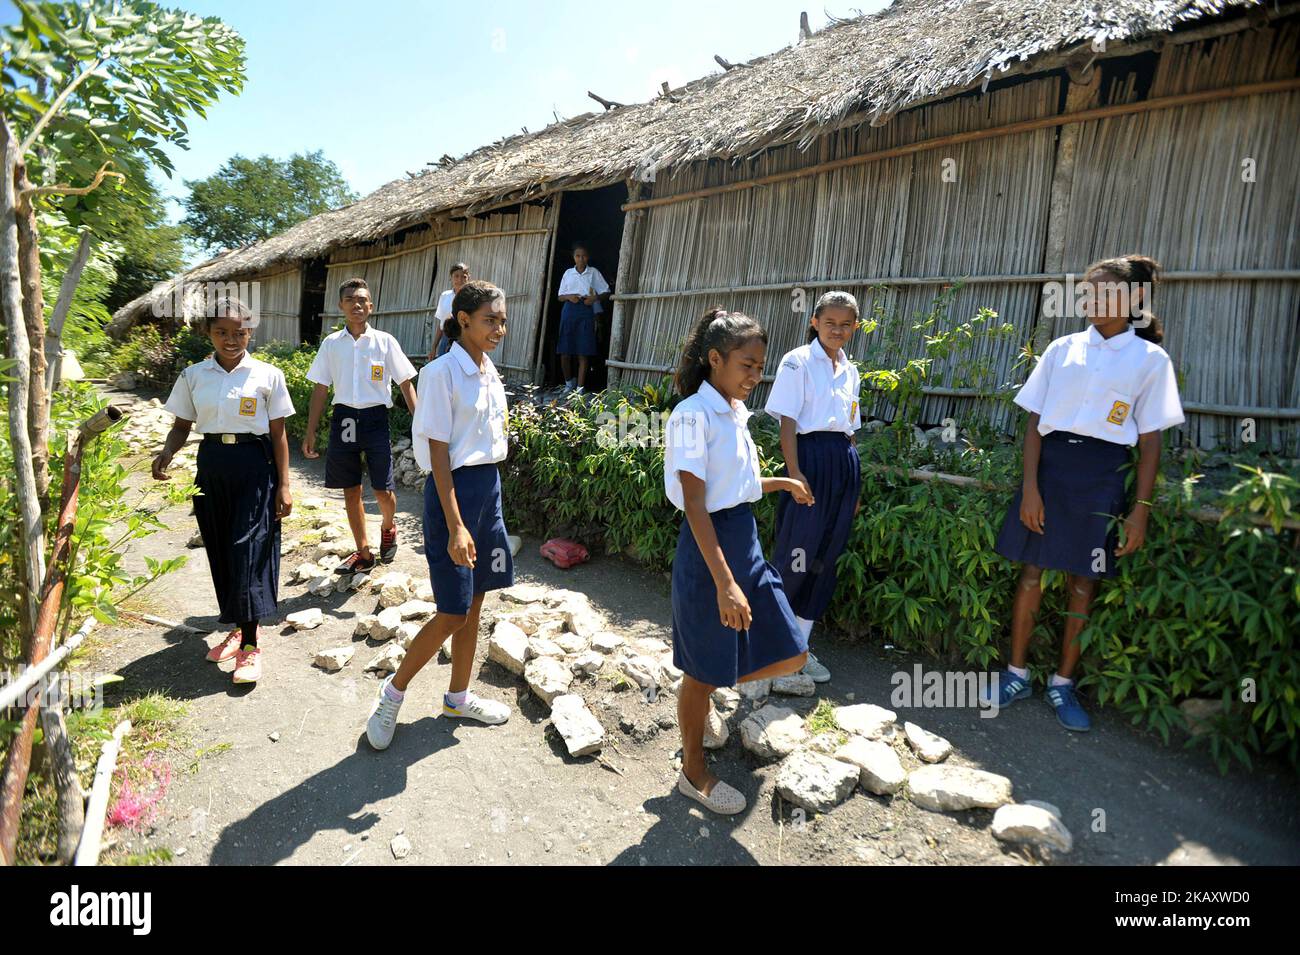 Junior High school students study in makeshift school buildings with dirt floors and thatched roofs and very poor facilities at Amabi Oefeto Timur, Kupang, East Nusa Tenggara (NTT), Indonesia, At Mai, 08, 2018. since three years ago, since the school was built on the self-supporting community until now not yet have adequate building facilities and adequate, so that in summer the students and teachers have to learn in the dust and mud during the rainy season, while the distance school with city government, East Nusa Tenggara Education Quality Assurance as many as 5000 school classrooms in NTT d Stock Photo